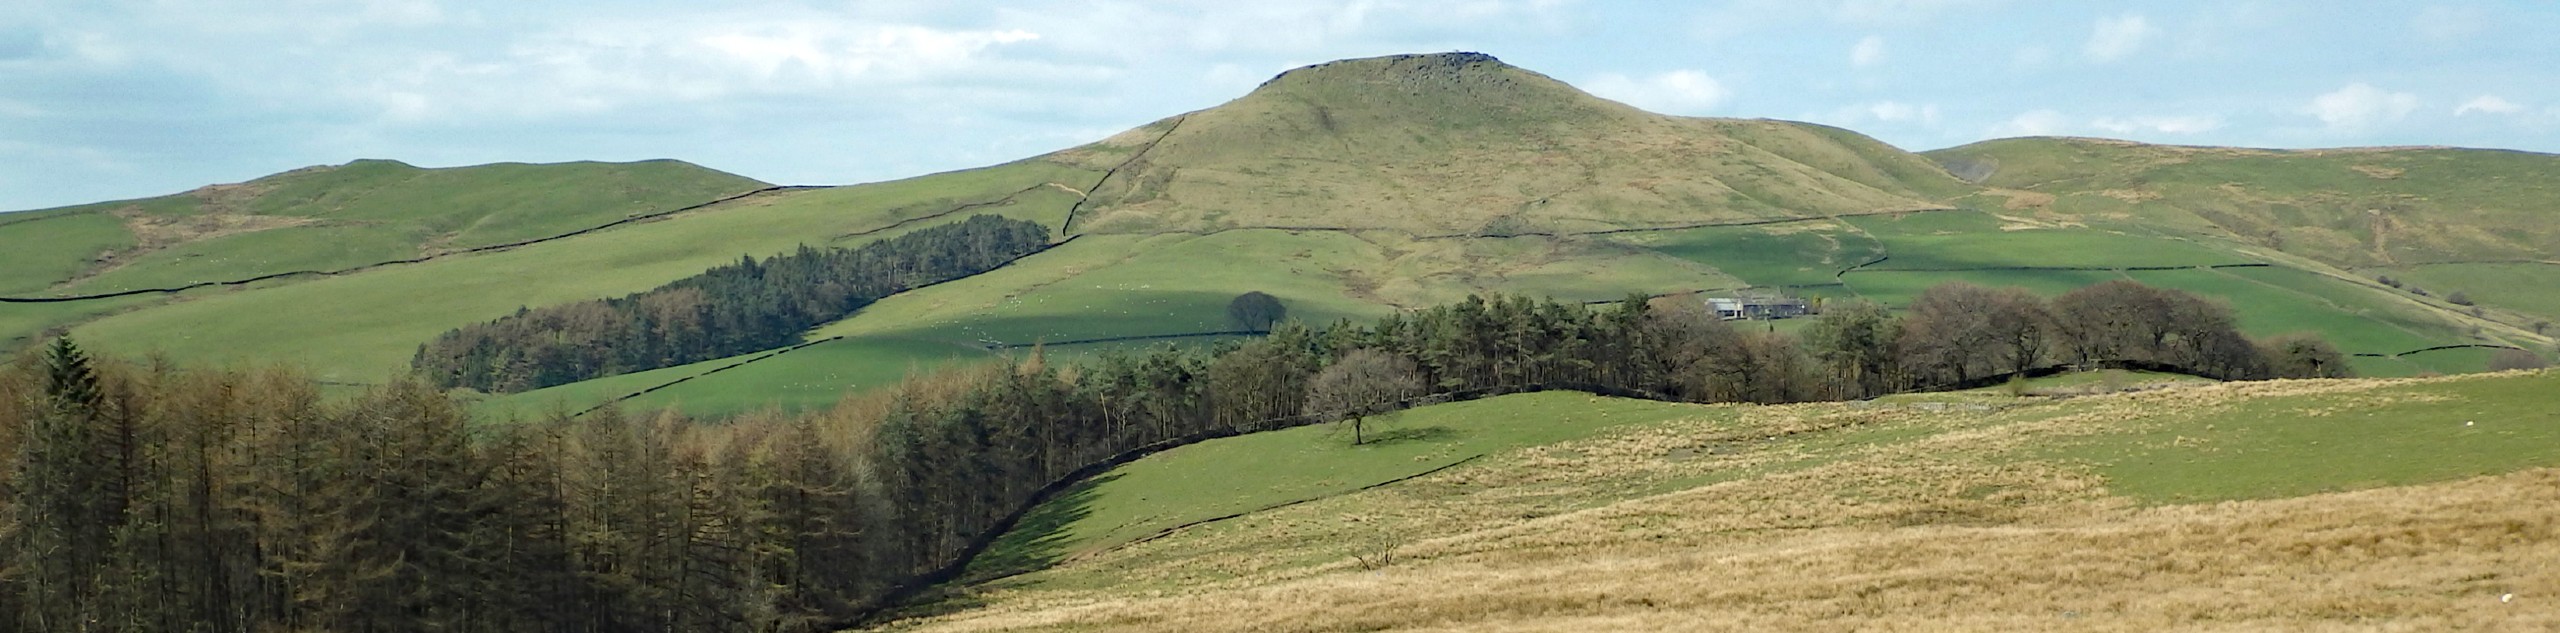 Tegg’s Nose and Macclesfield Forest